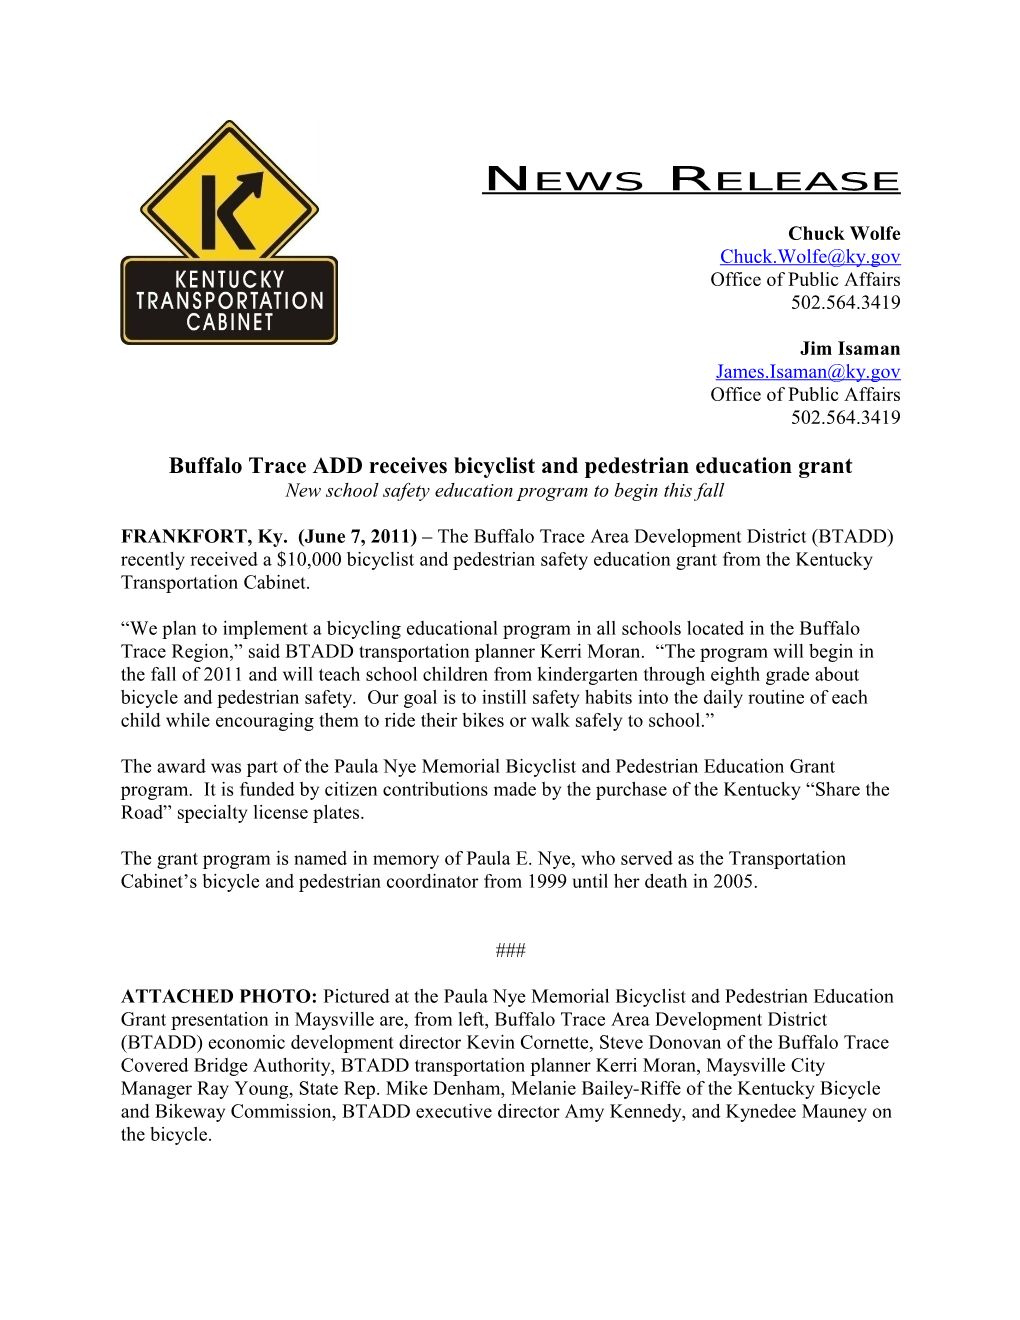 Buffalo Trace ADD Receives Bicyclist and Pedestrian Education Grant